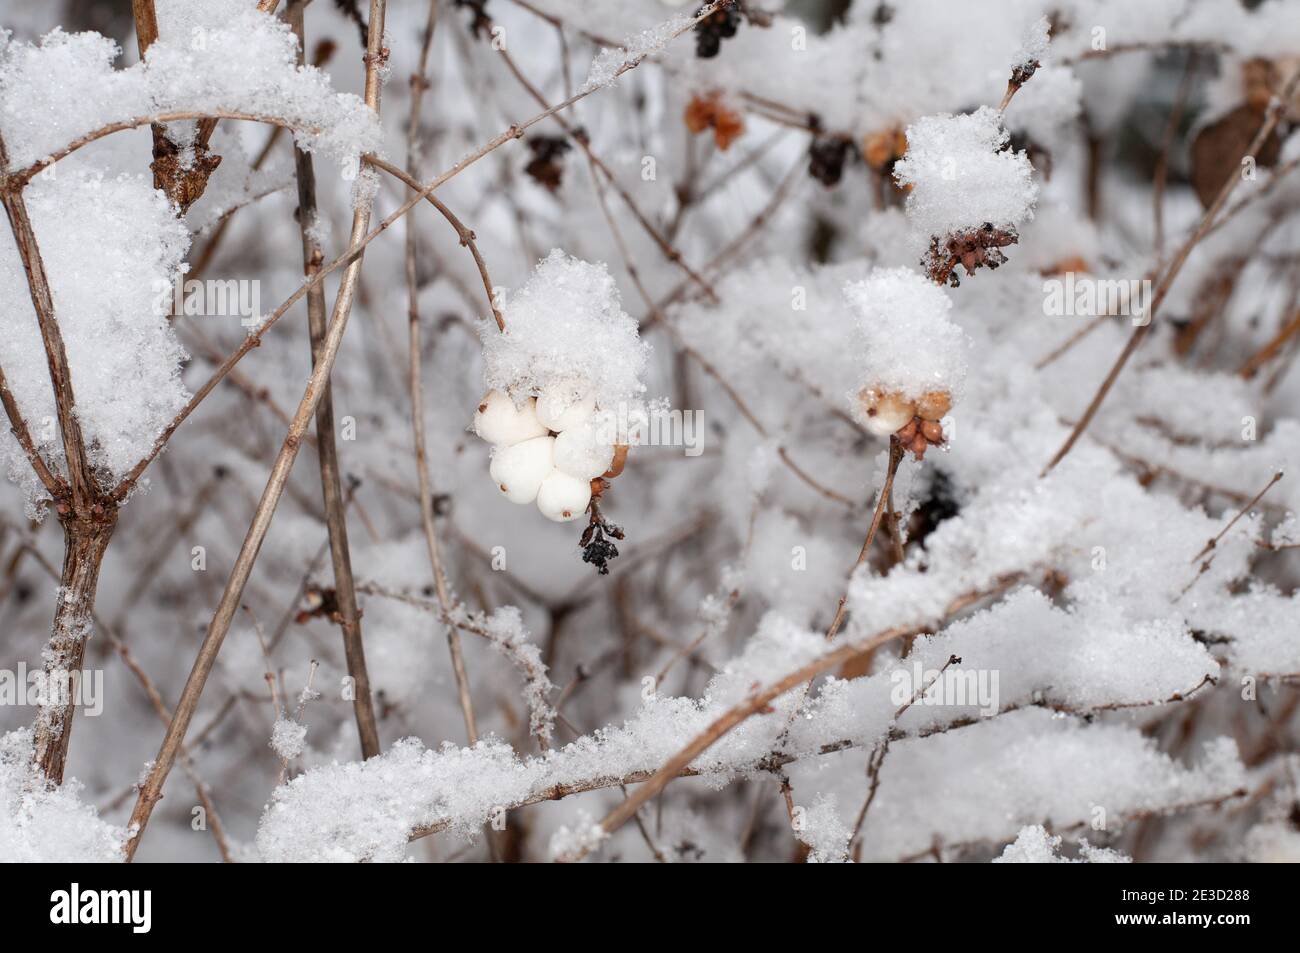 close-up of the poisonous white fruits of a snowberry bush with snow covered twigs in wintertime Stock Photo